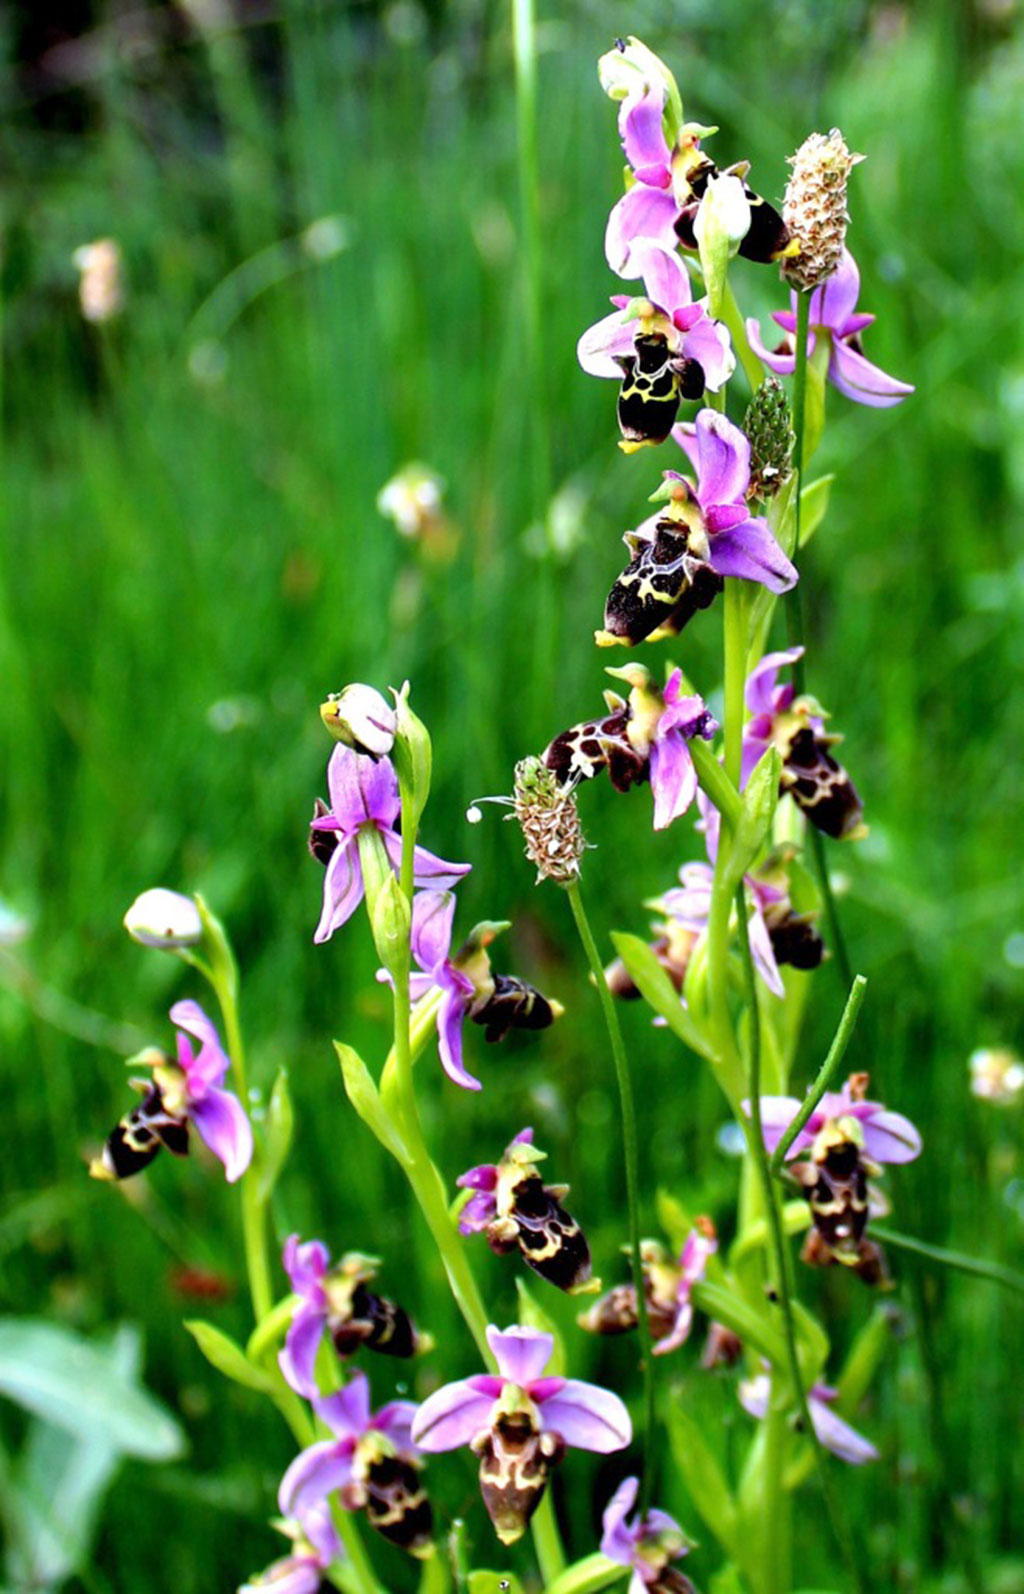 Unique species of Turkmen flora – wild orchids, turn into blossom in the mountains